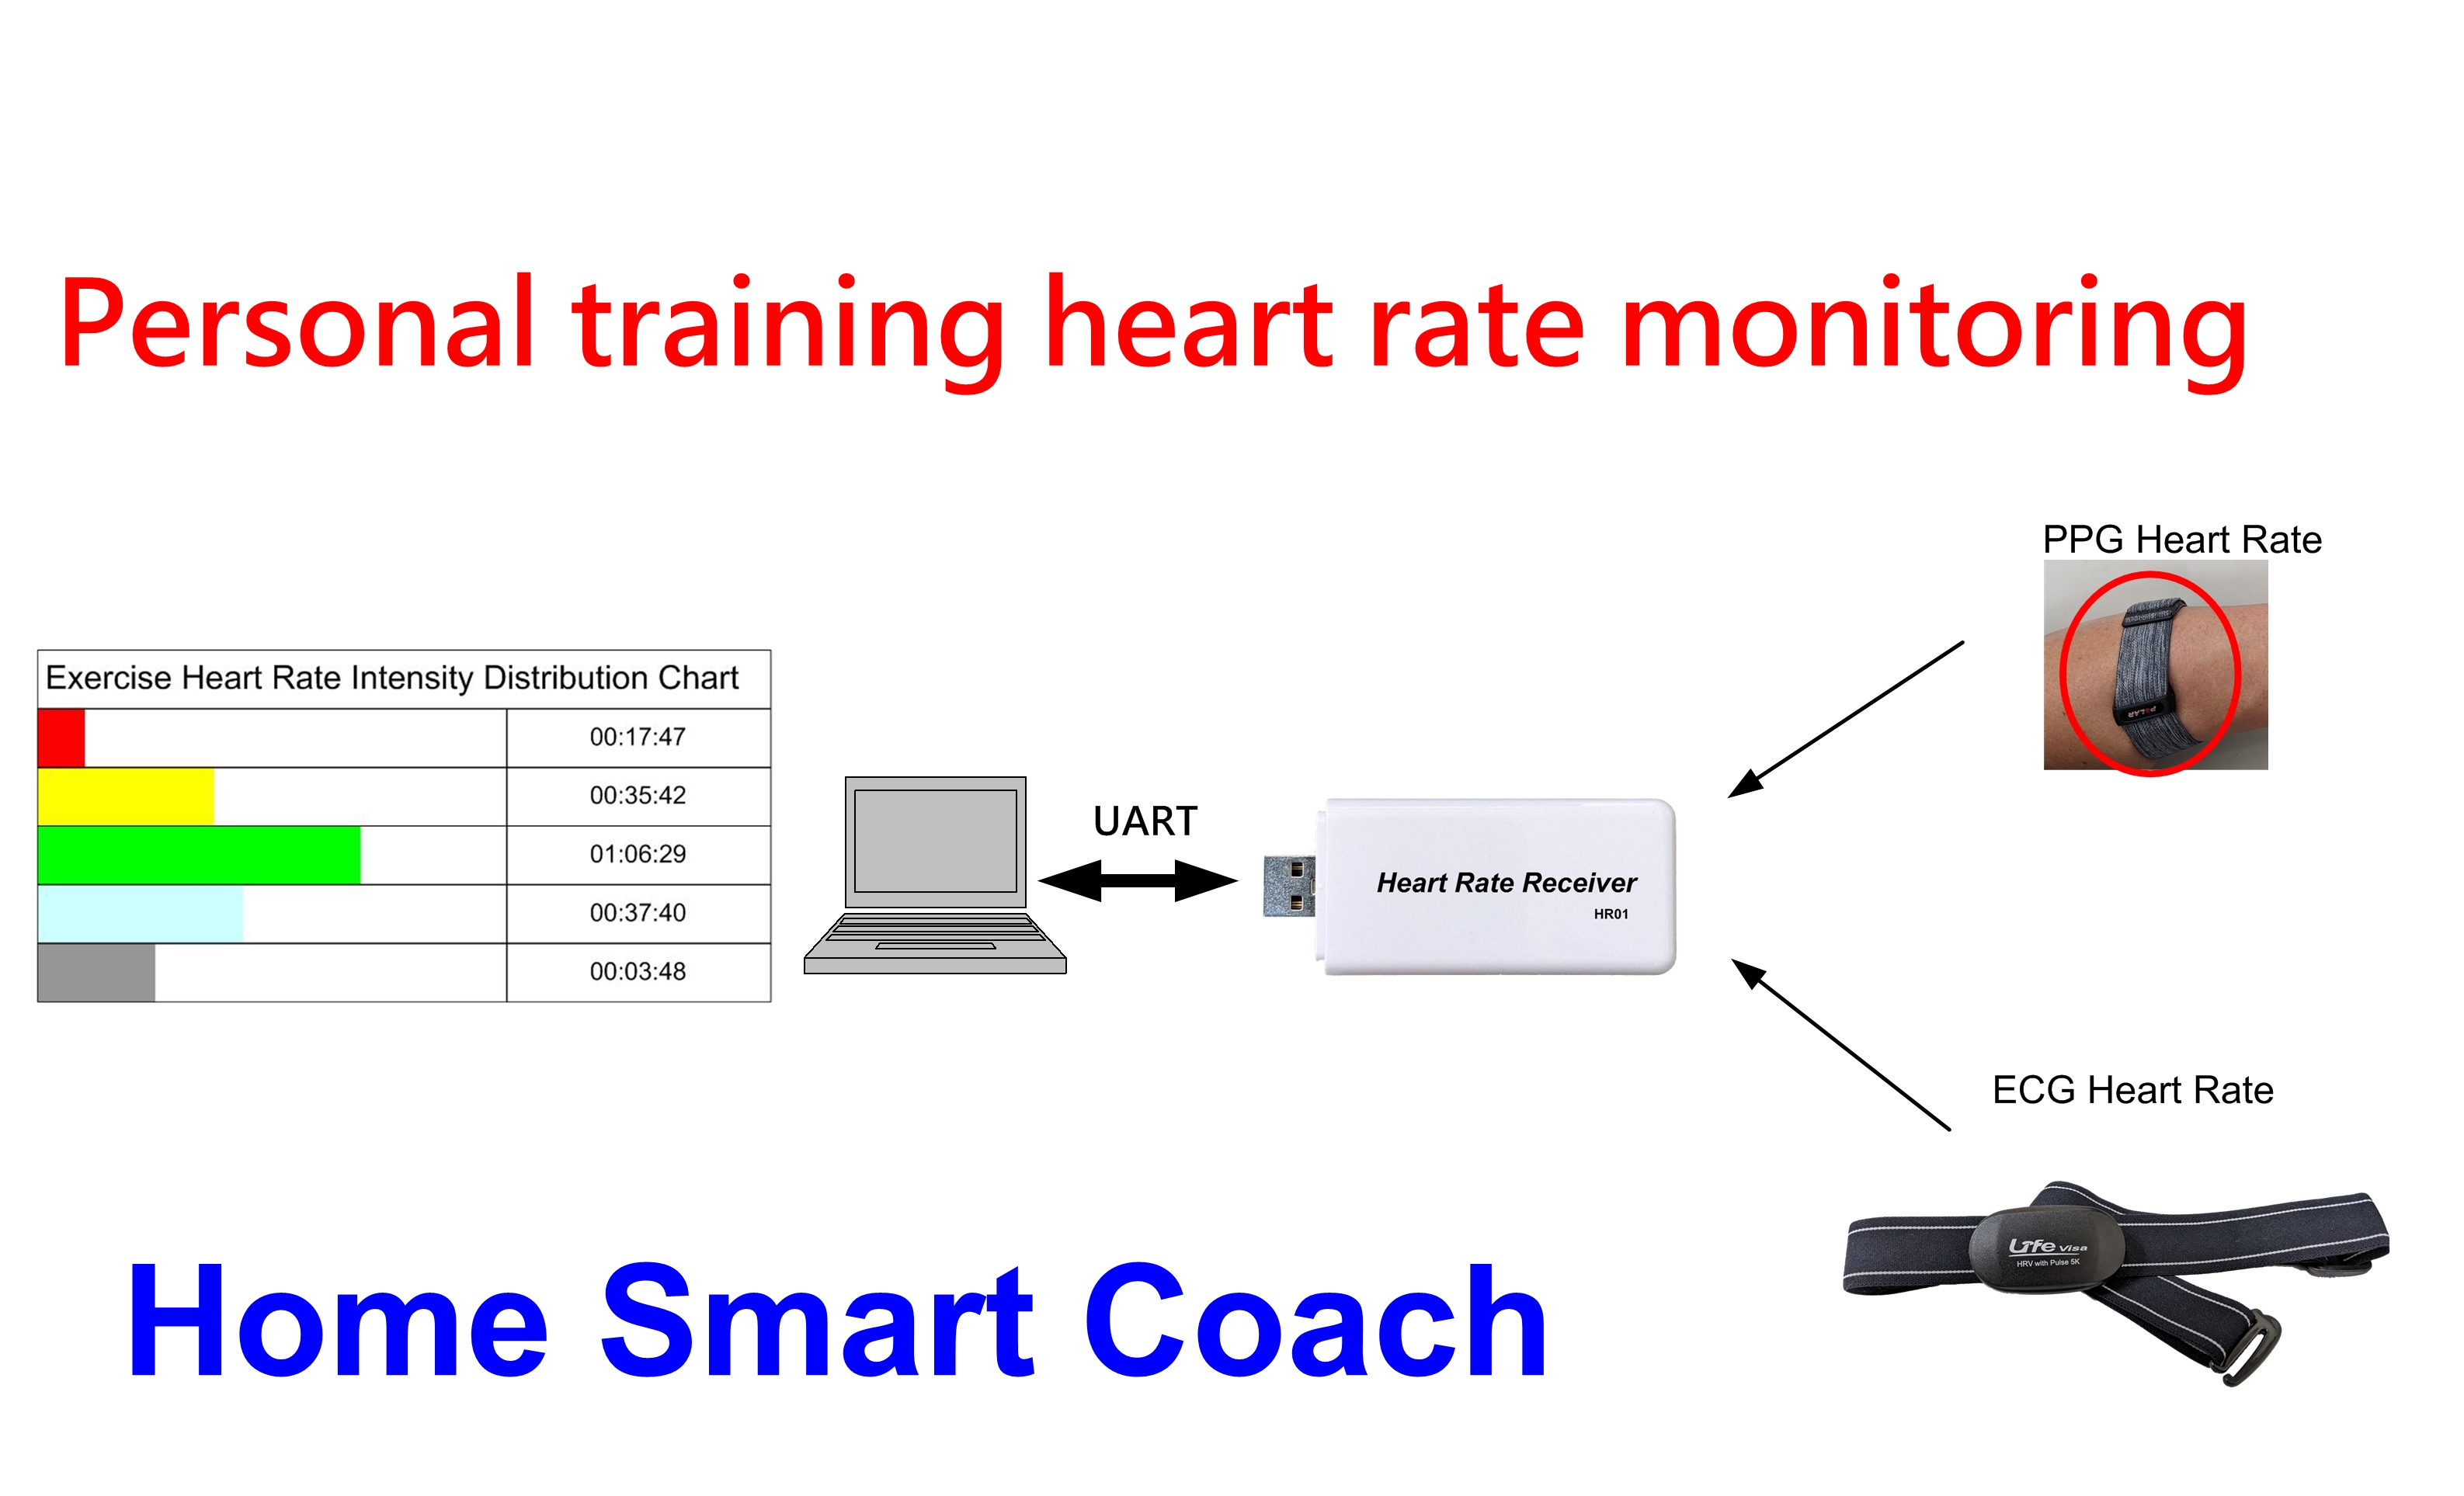 Personal training heart rate monitoring